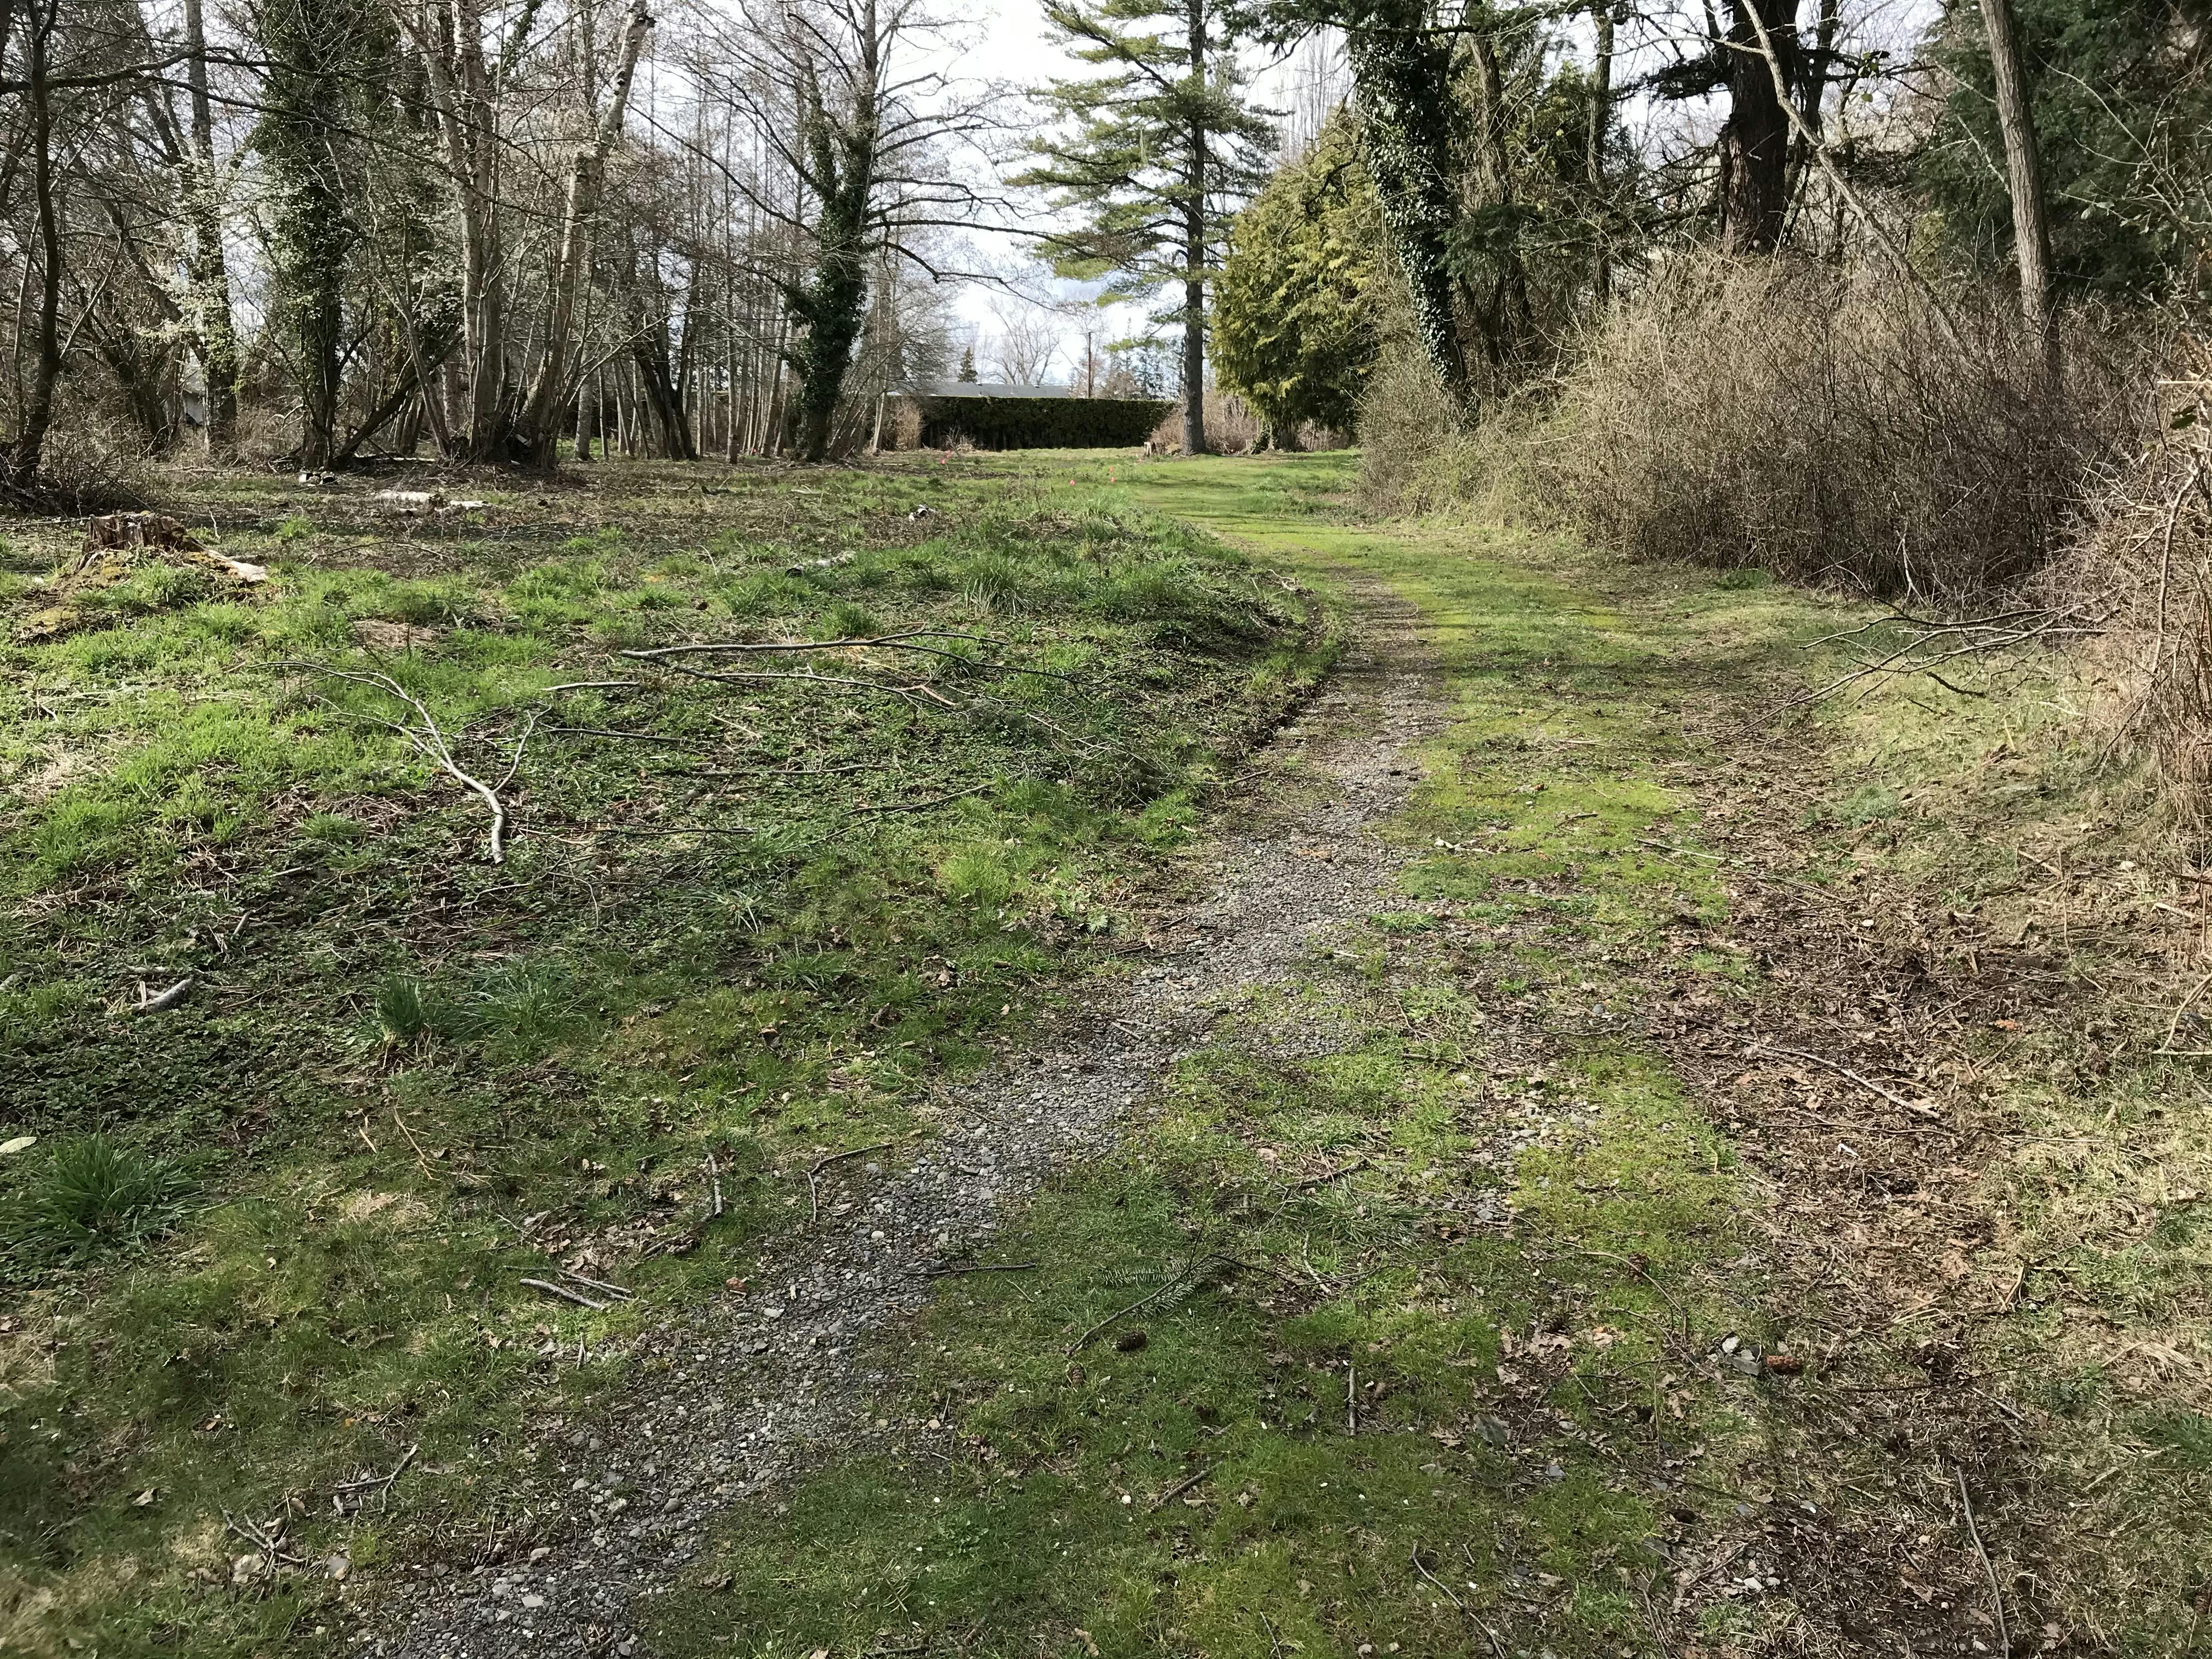 Old driveway alignment into the park